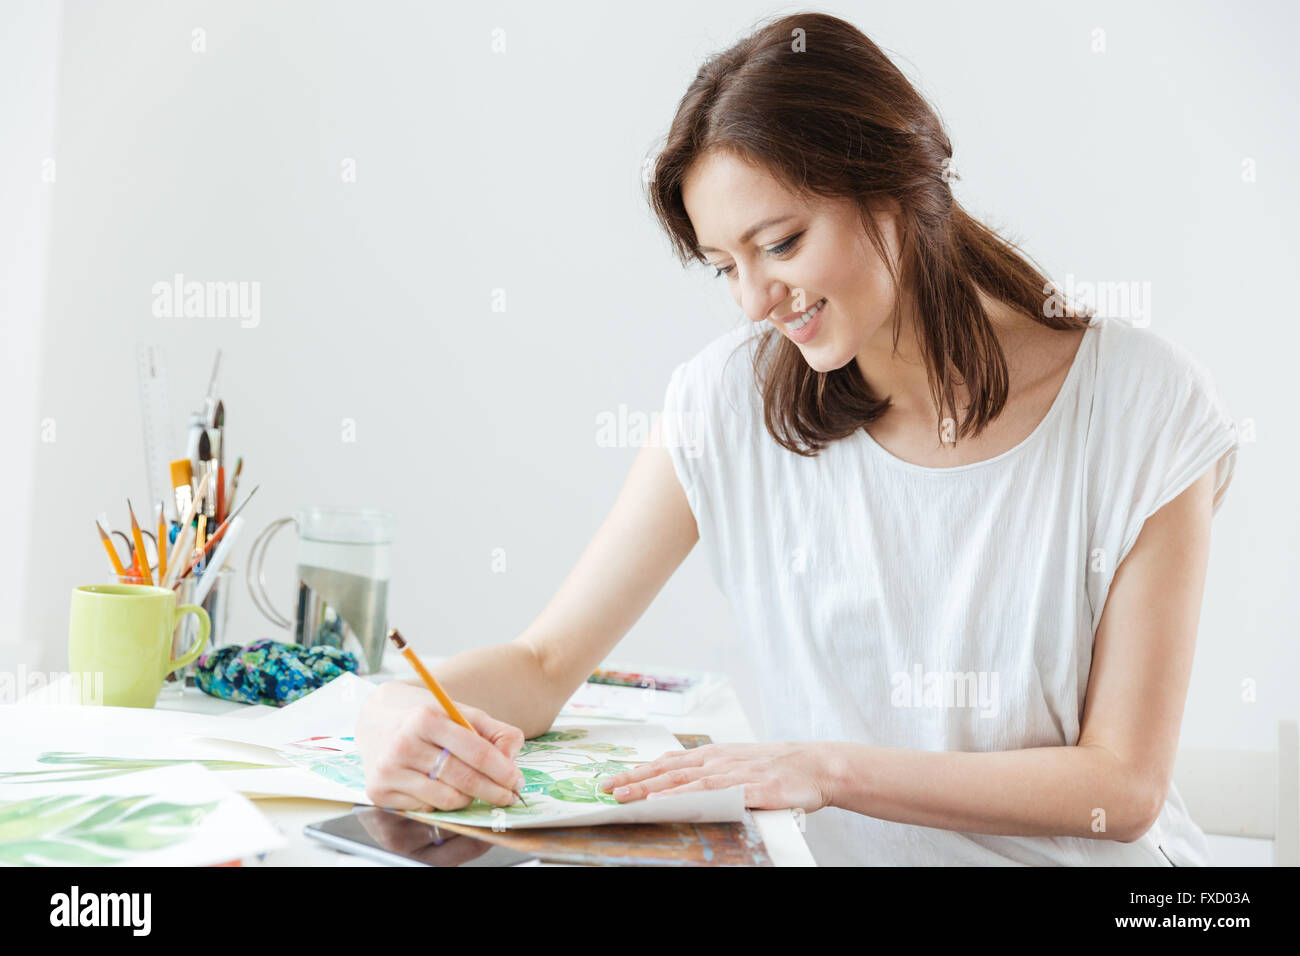 Smiling pretty woman painter drawing at the table Stock Photo